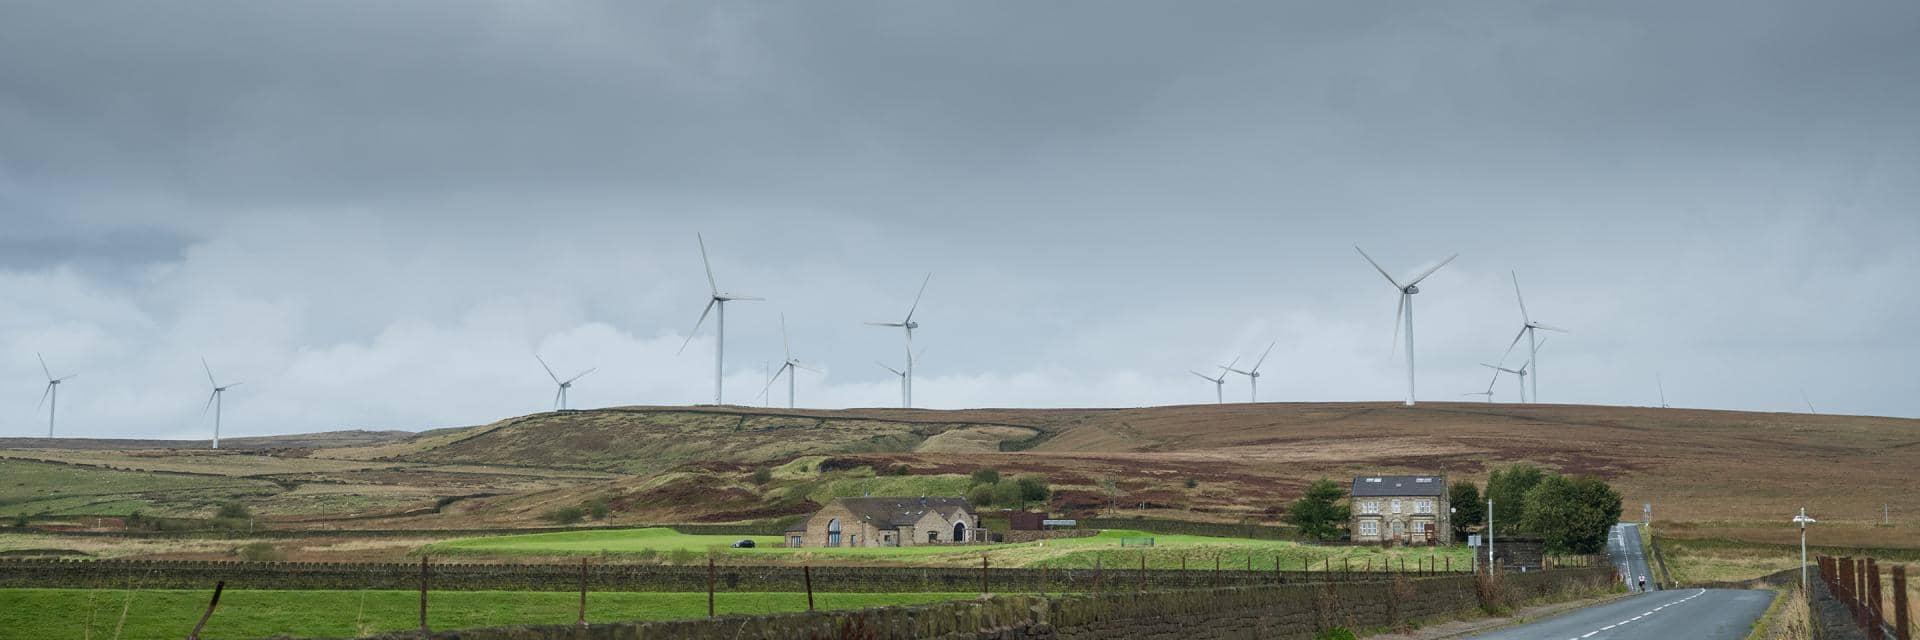 A line of wind turbines on a hillside with a road and old stone buildings in the foreground